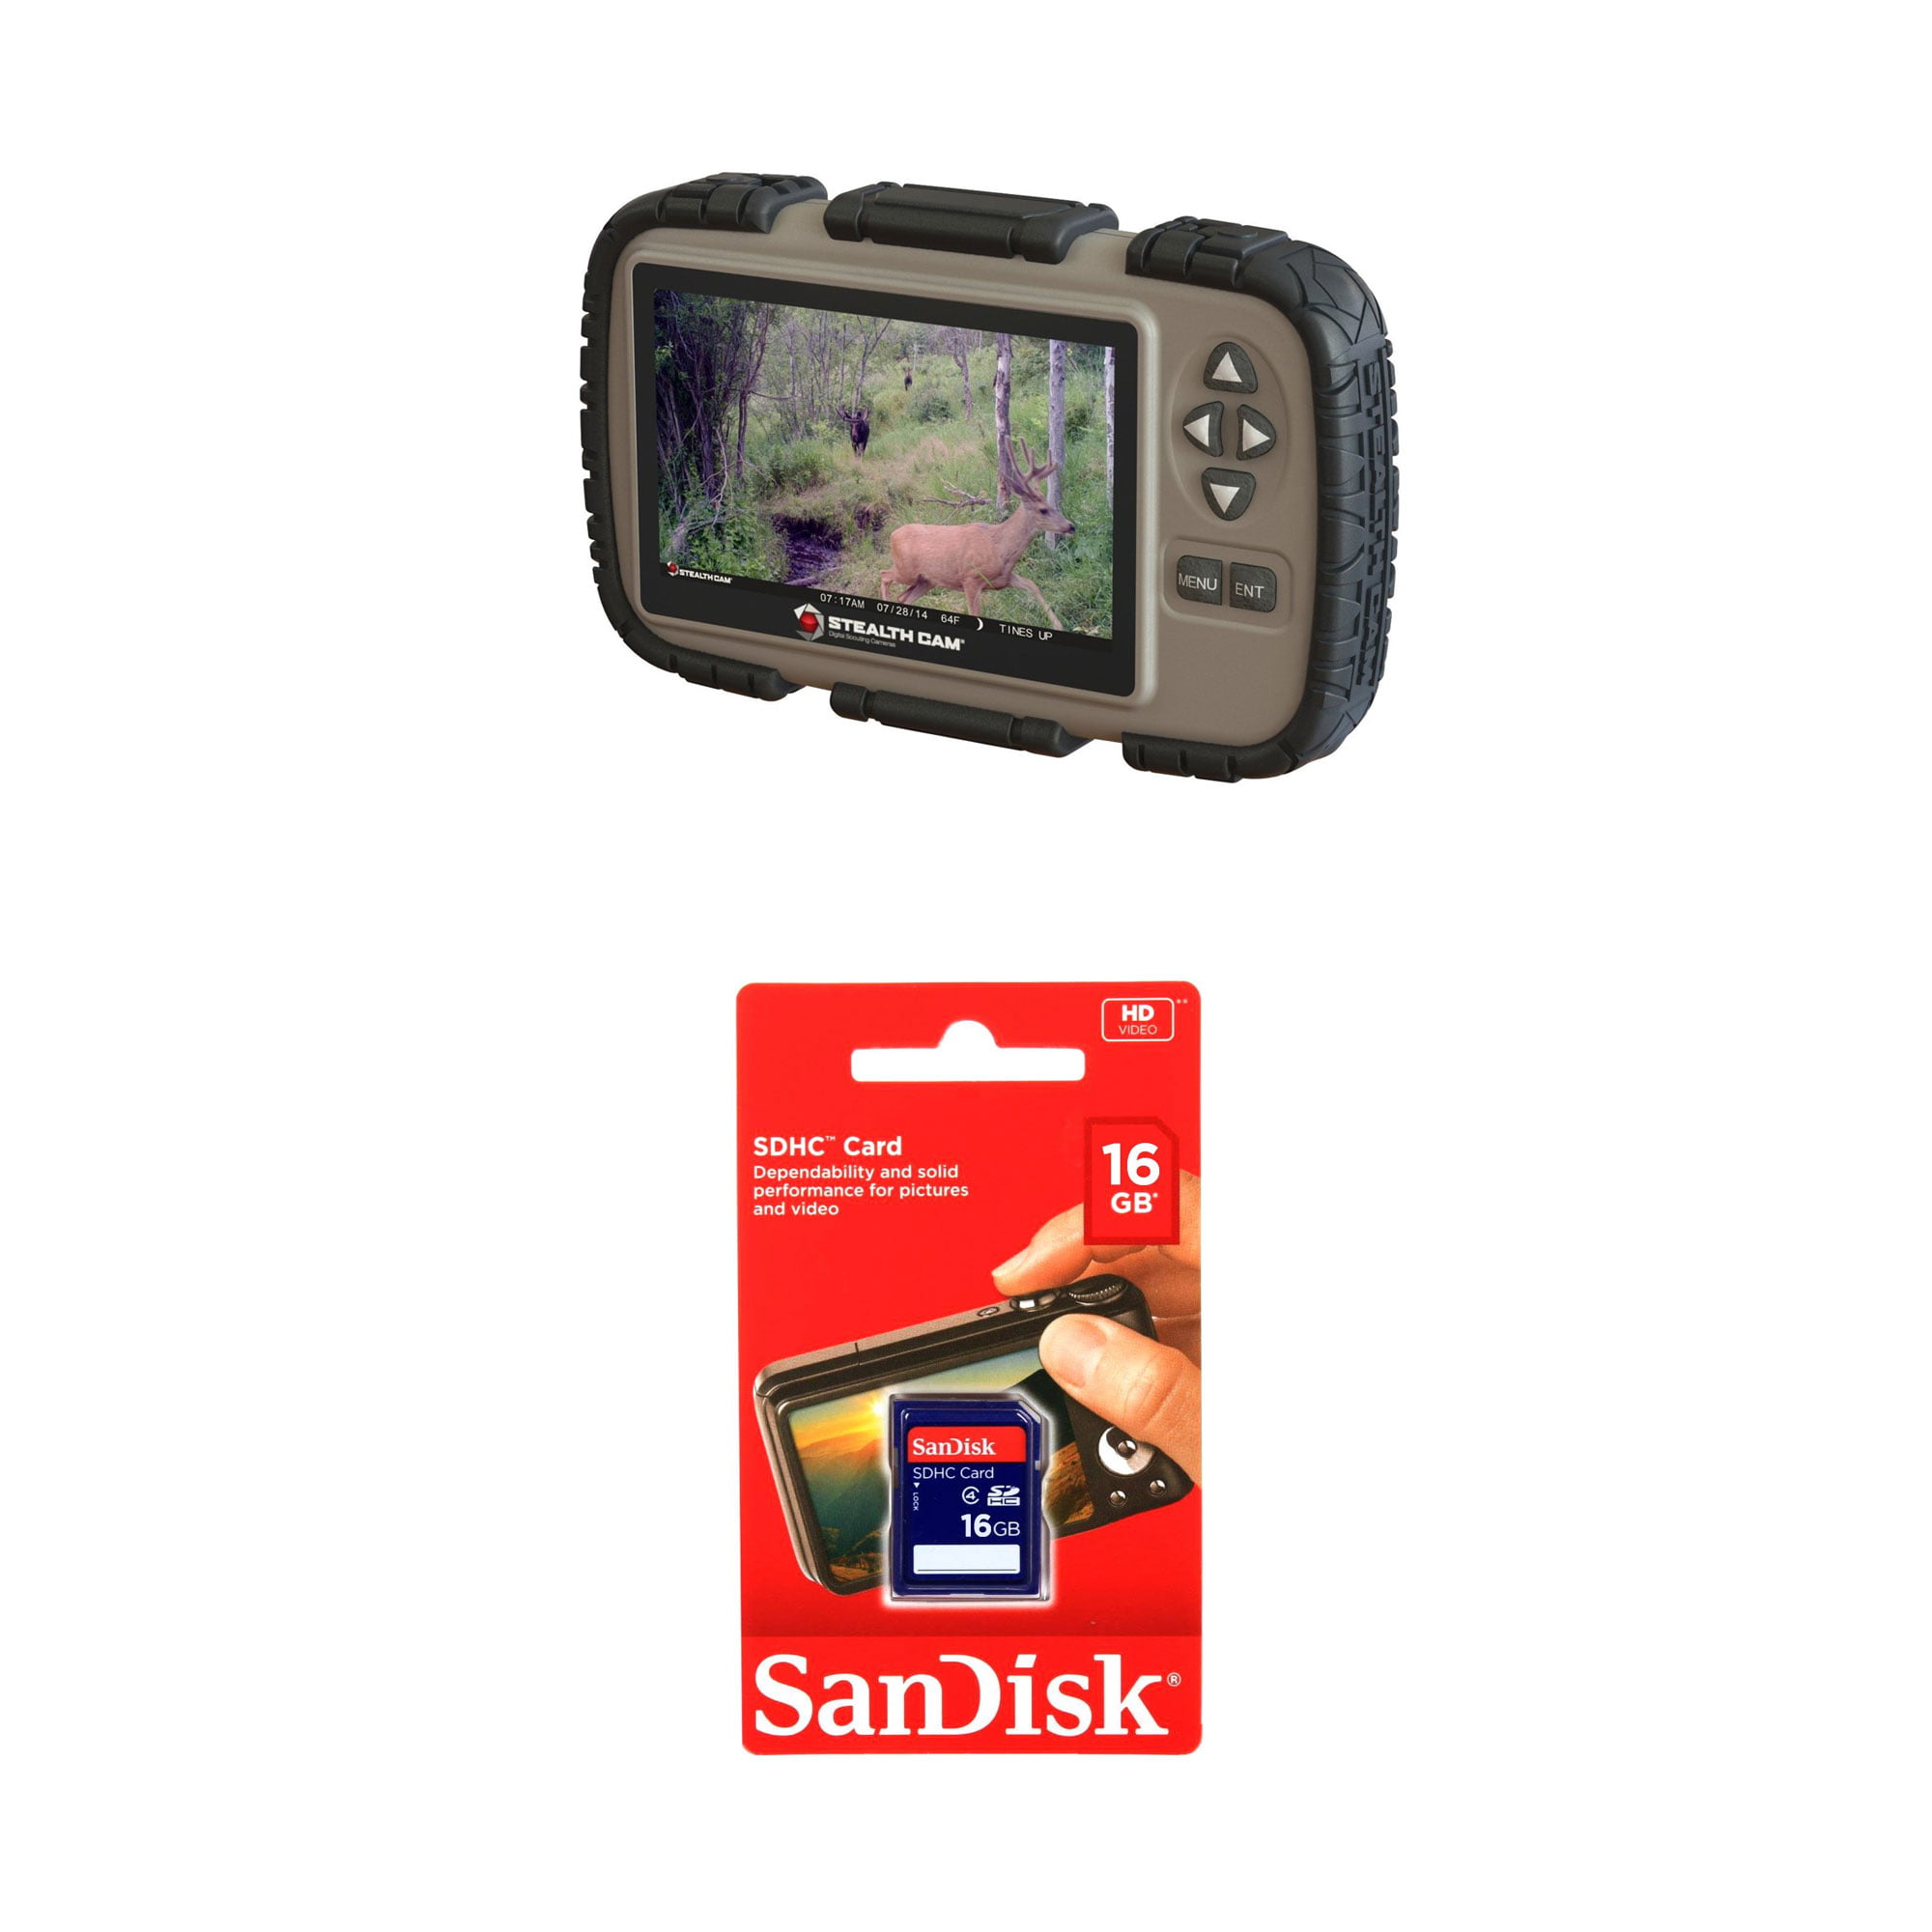 STEALTH CAM CRV43 4.3" SD CARD PICTURE AND VIDEO VIEWER 